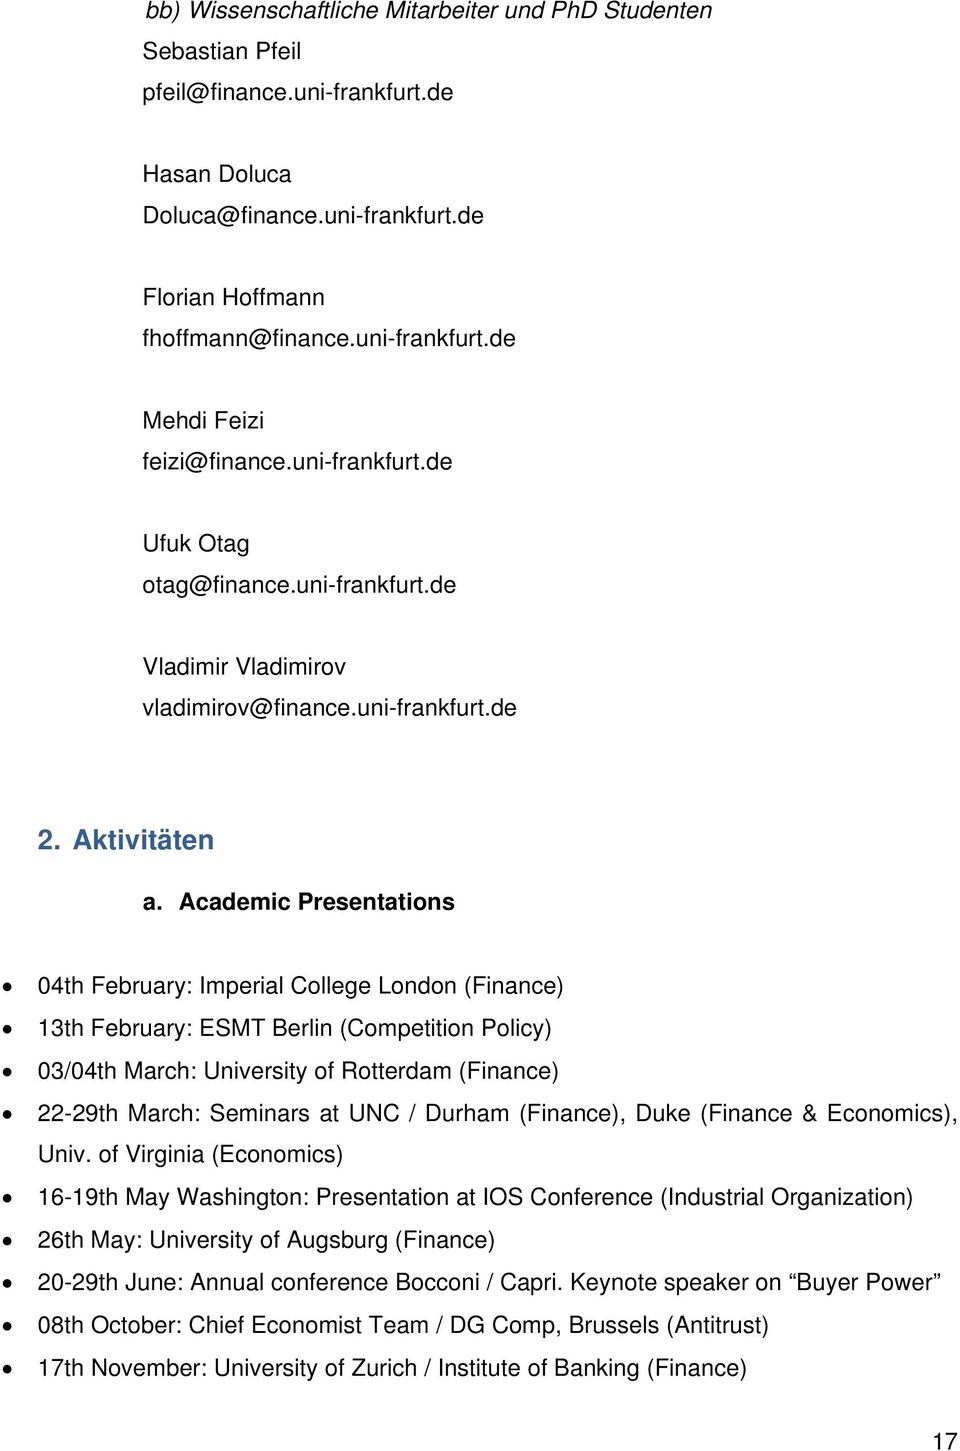 Academic Presentations 04th February: Imperial College London (Finance) 13th February: ESMT Berlin (Competition Policy) 03/04th March: University of Rotterdam (Finance) 22-29th March: Seminars at UNC